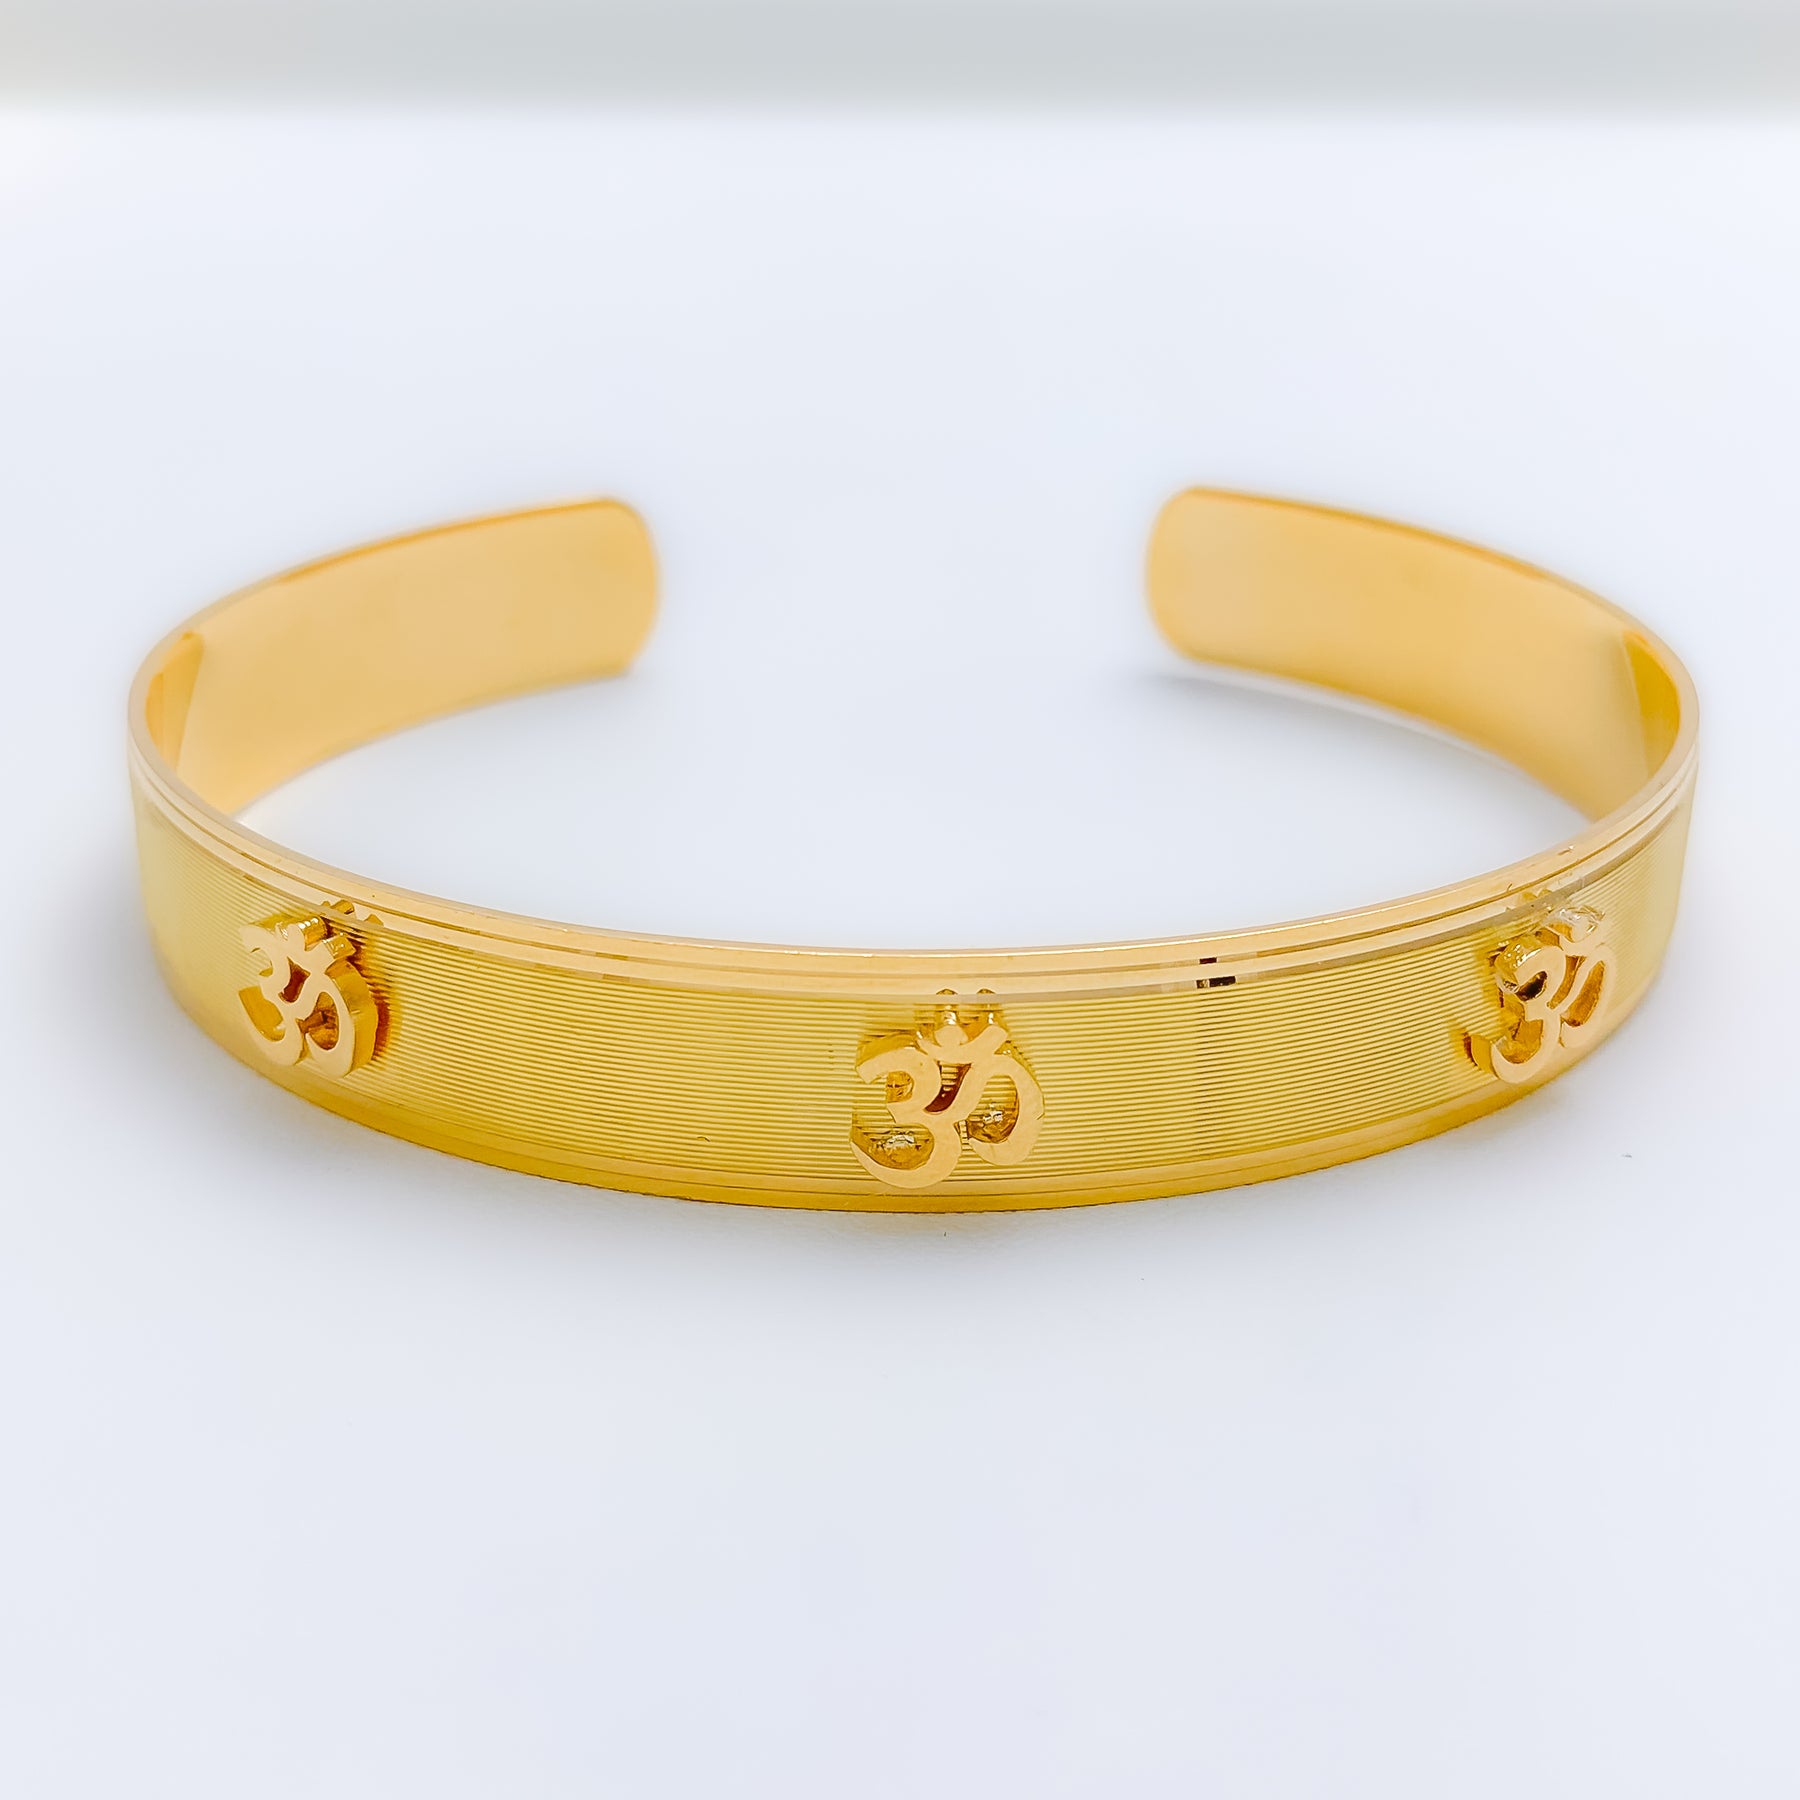 Jewellery - Classic bracelet in gold color - Size Large | DW